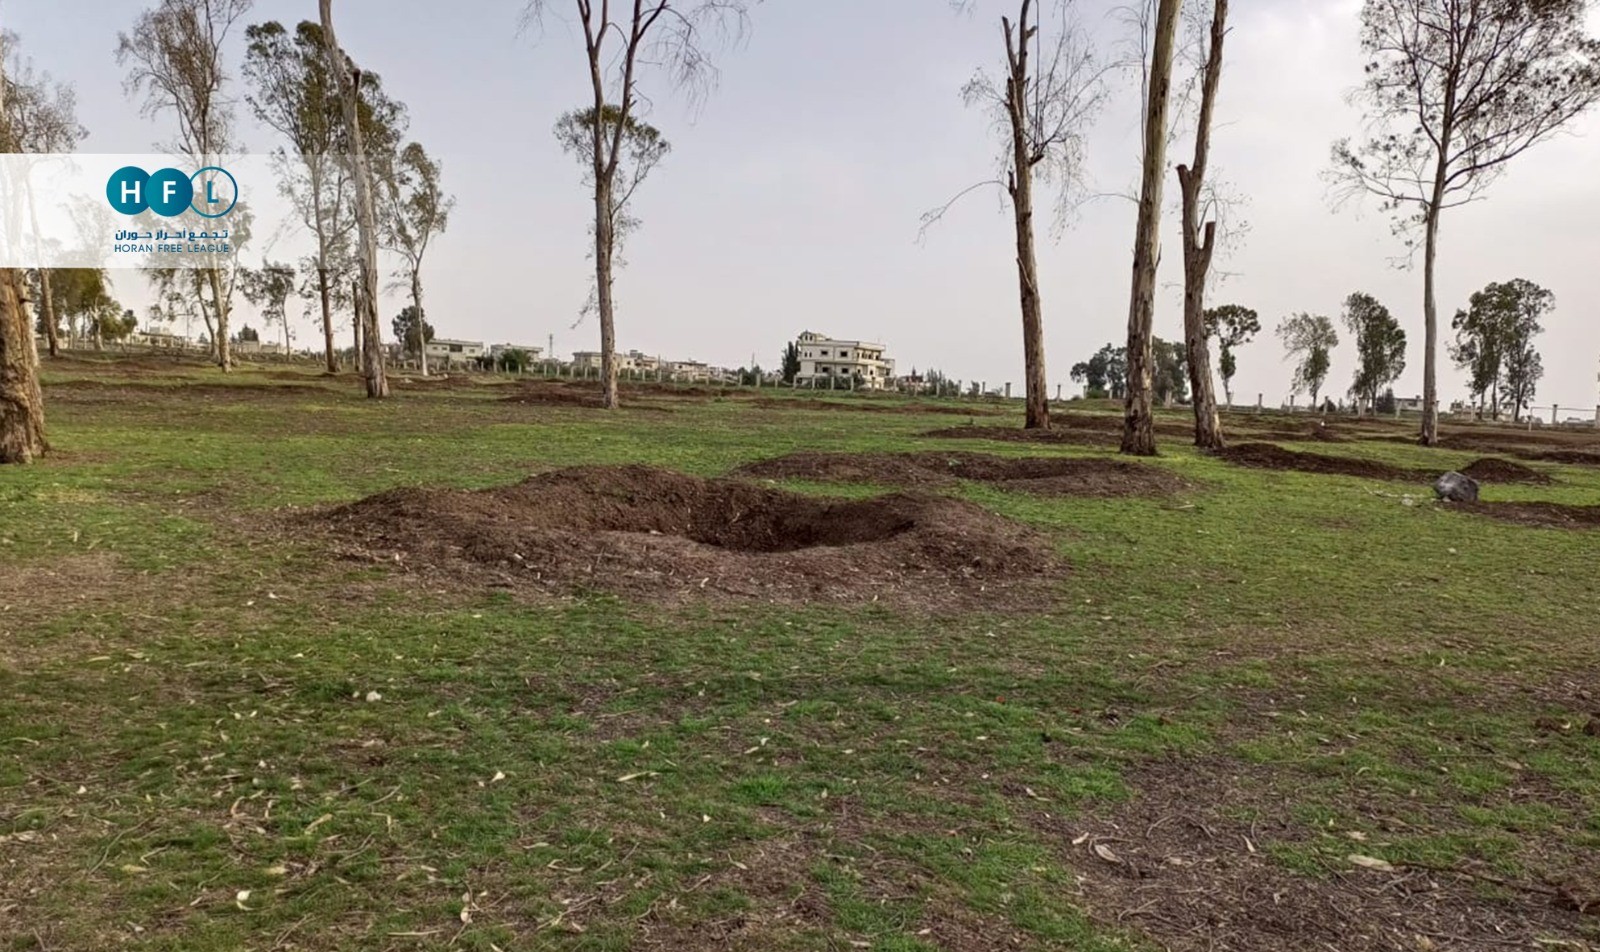 Small pits mark the places where trees once stood in al-Muzayrib, a town in the western Daraa countryside, before they were felled, reportedly by local armed groups, 20/3/2023 (Horan Free League)